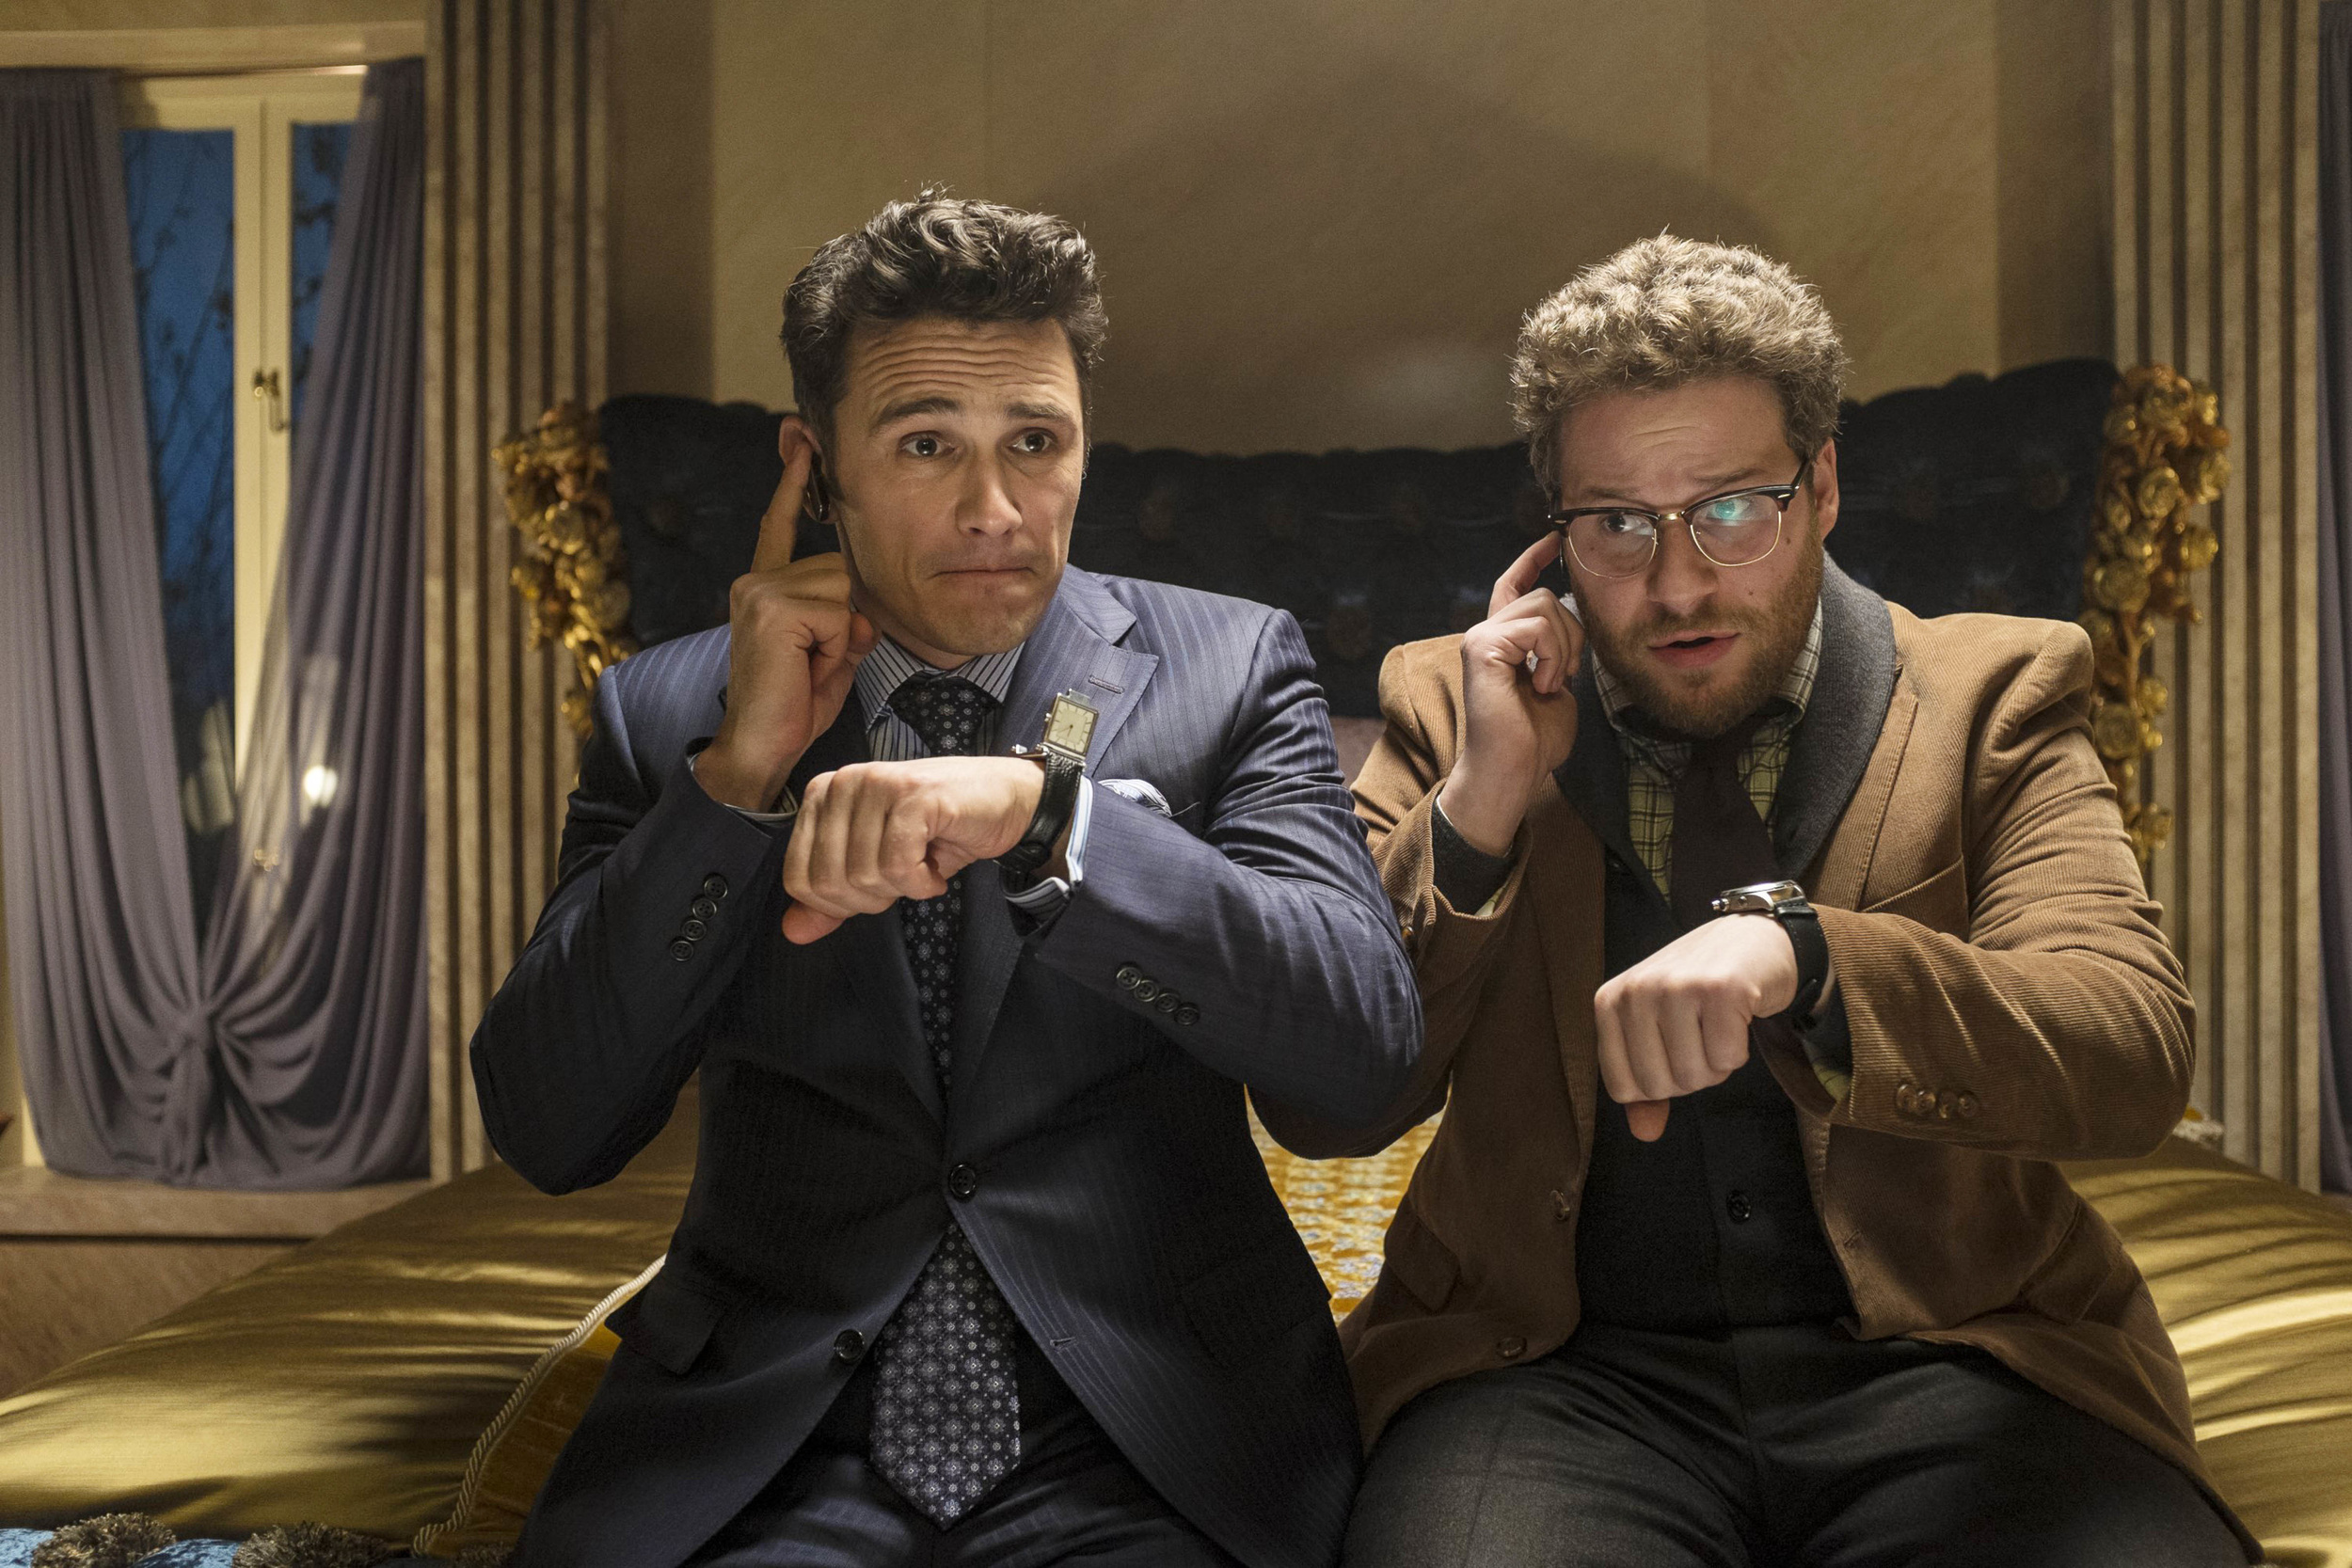 <p>I was not in a hurry to watch <em>The Interview</em>, but I'm glad it exists just because, looking back on it now, the controversy surrounding the film was so ridiculous... and it was hilarious! A classic Seth Rogen/Evan Goldberg collaboration, this film gives their fans everything they loved about <em>Superbad</em> (2007) and <em>Pineapple Express </em>(2008), plus a Katy Perry-loving Kim Jong-un played by Randall Park. It has also given us the ever-inspiring phrase, "They hate us because they ain't us!" Brb, going to rewatch this immediately. </p><p><a href='https://www.msn.com/en-us/community/channel/vid-cj9pqbr0vn9in2b6ddcd8sfgpfq6x6utp44fssrv6mc2gtybw0us'>Follow us on MSN to see more of our exclusive entertainment content.</a></p>